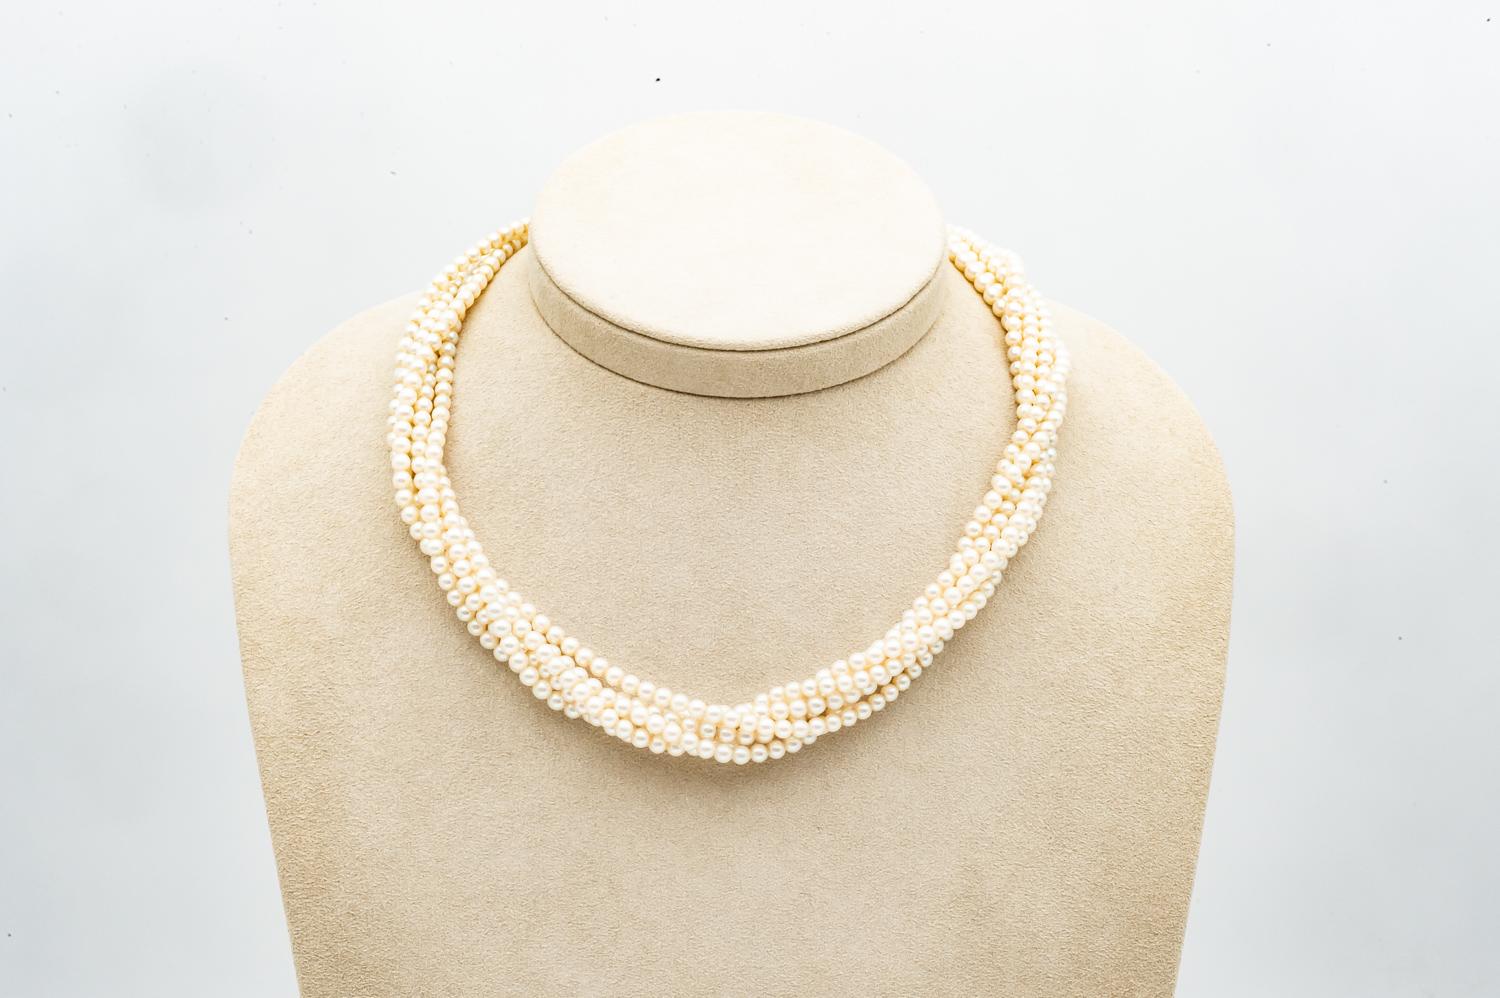 6 Strands Cultured Pearls Necklace 18k Yellow Gold and White Gold Clasp

6 rows of cultured pearls twisted with an elegant 18k Yellow Gold and White Gold clasp. 
Diameter of the pearls: 0,4 cm
Width : 0,9 cm / 0,3543 inch
Length : 42 cm / 16,5354